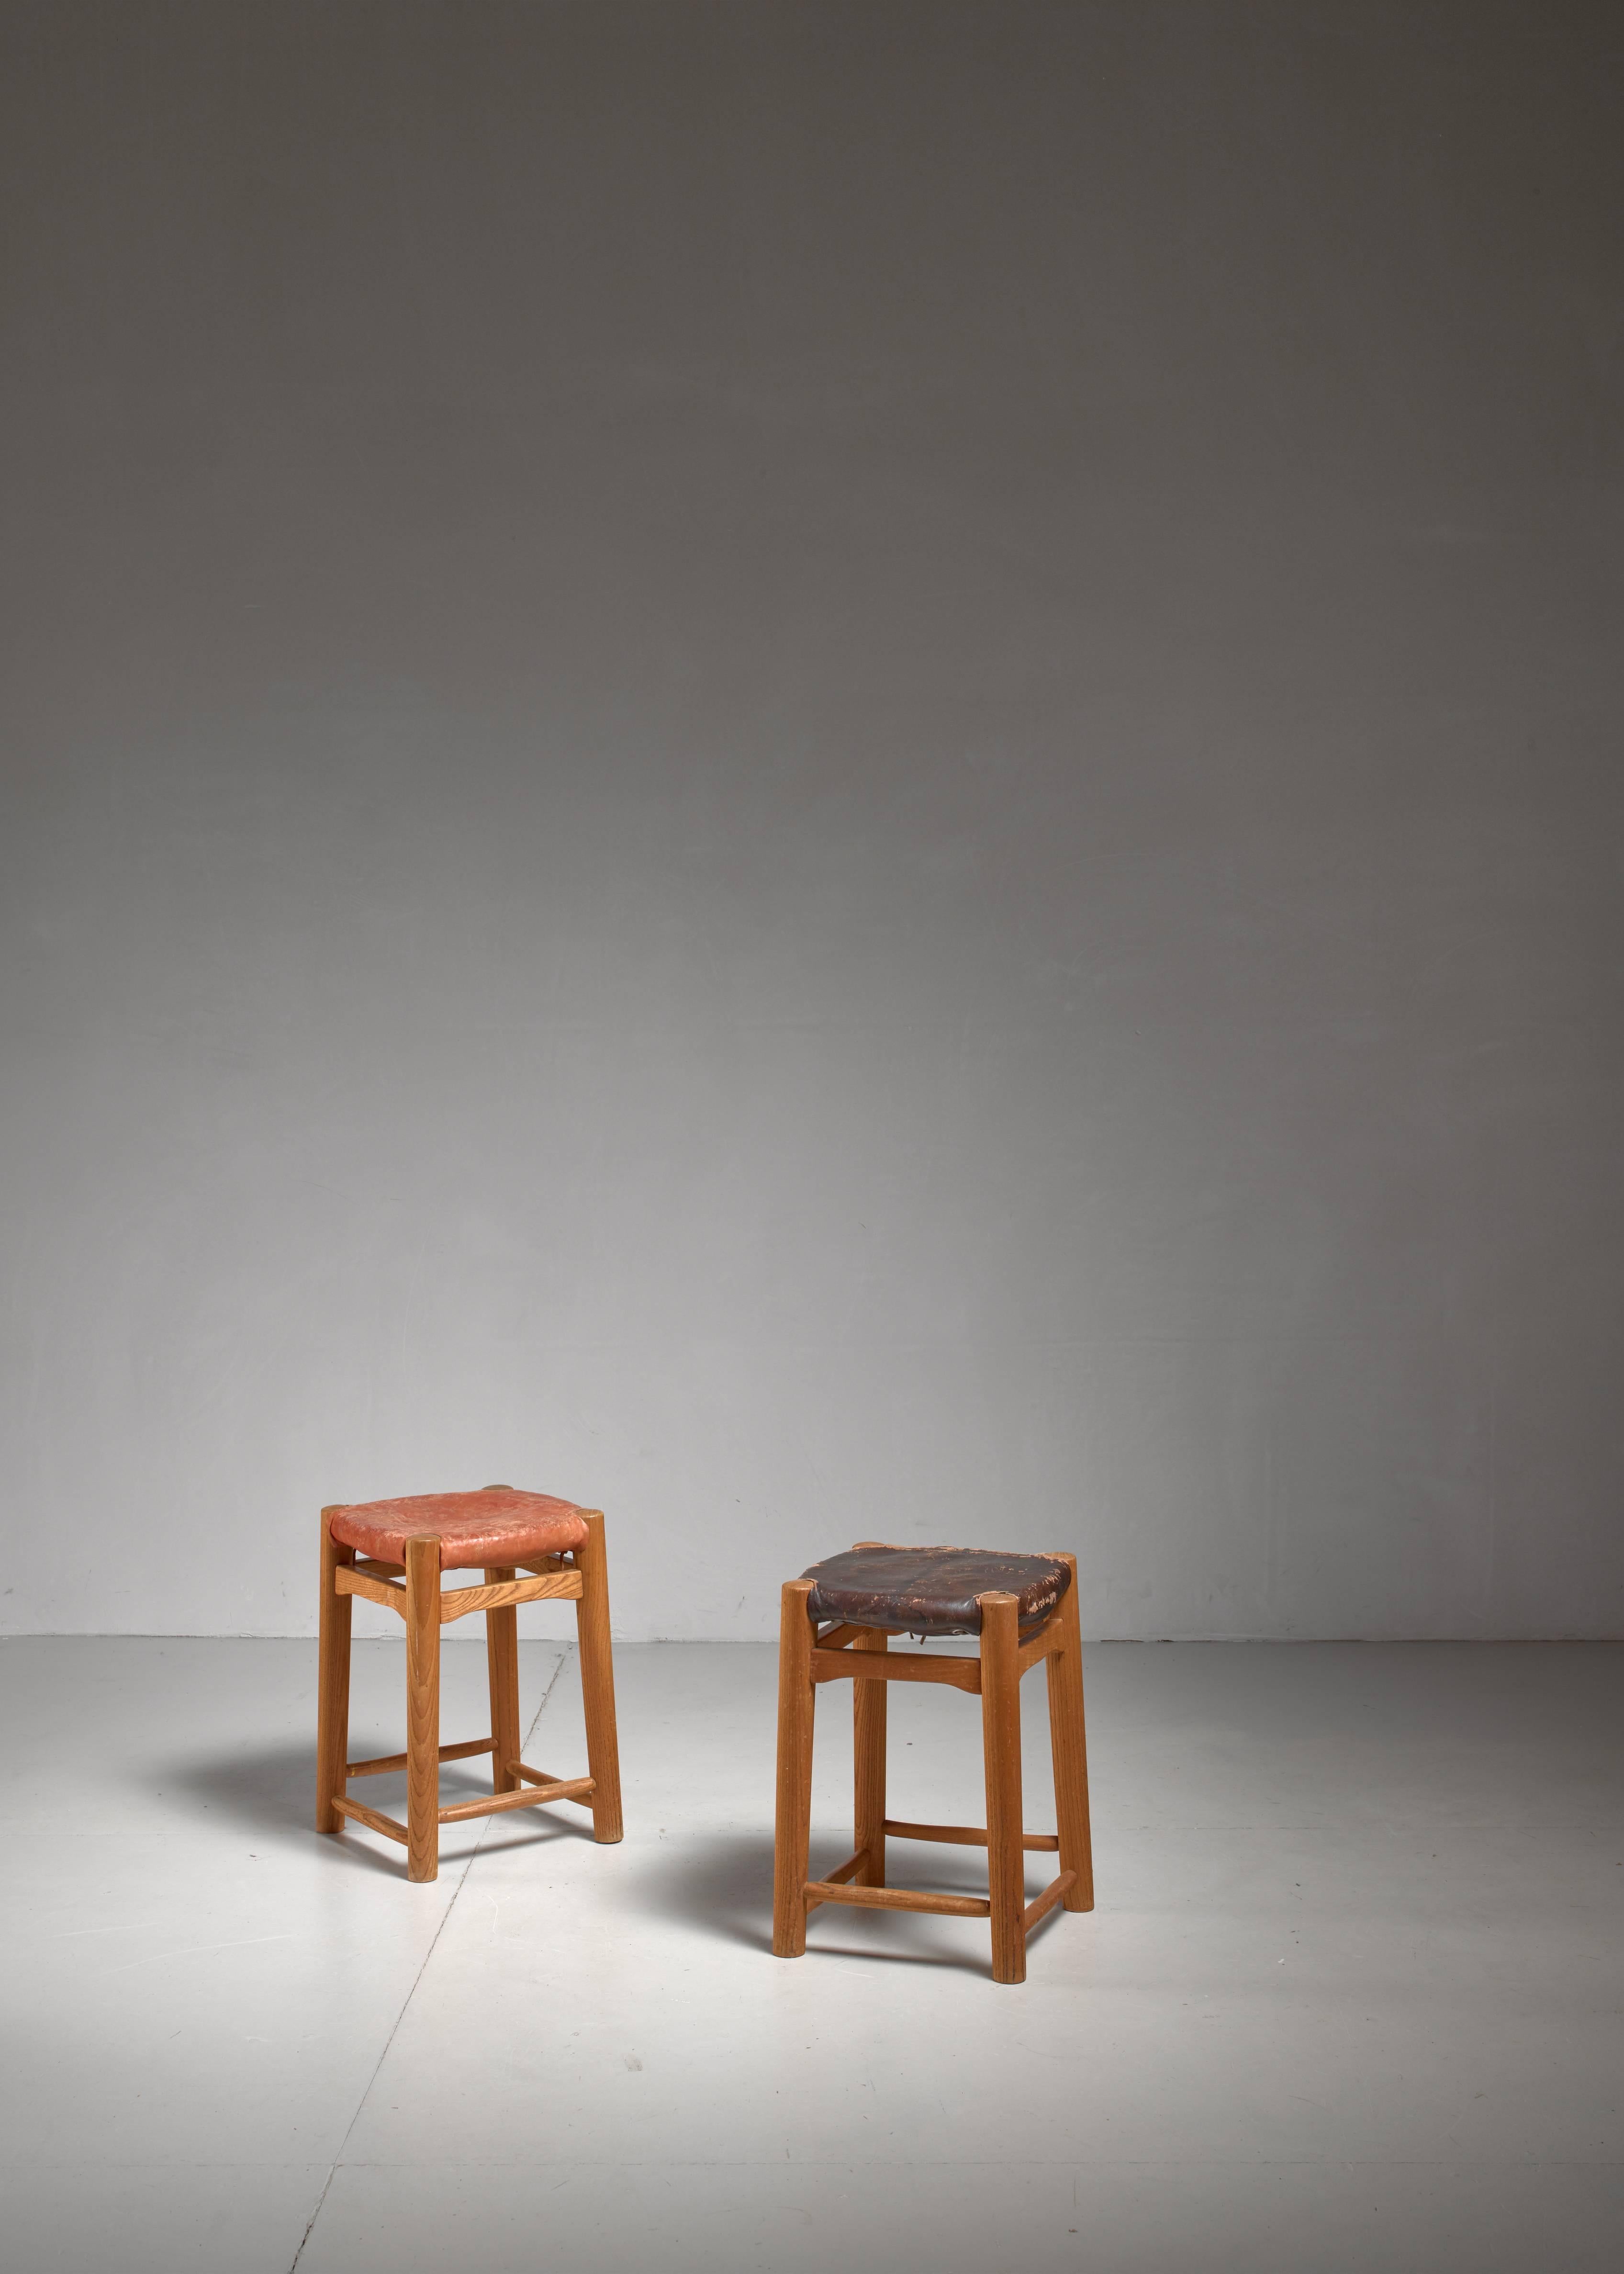 A pair of French stools with an oak frame, rush seat and a red and a brown leather seat pad, reminiscent to the work of Charlotte Perriand.